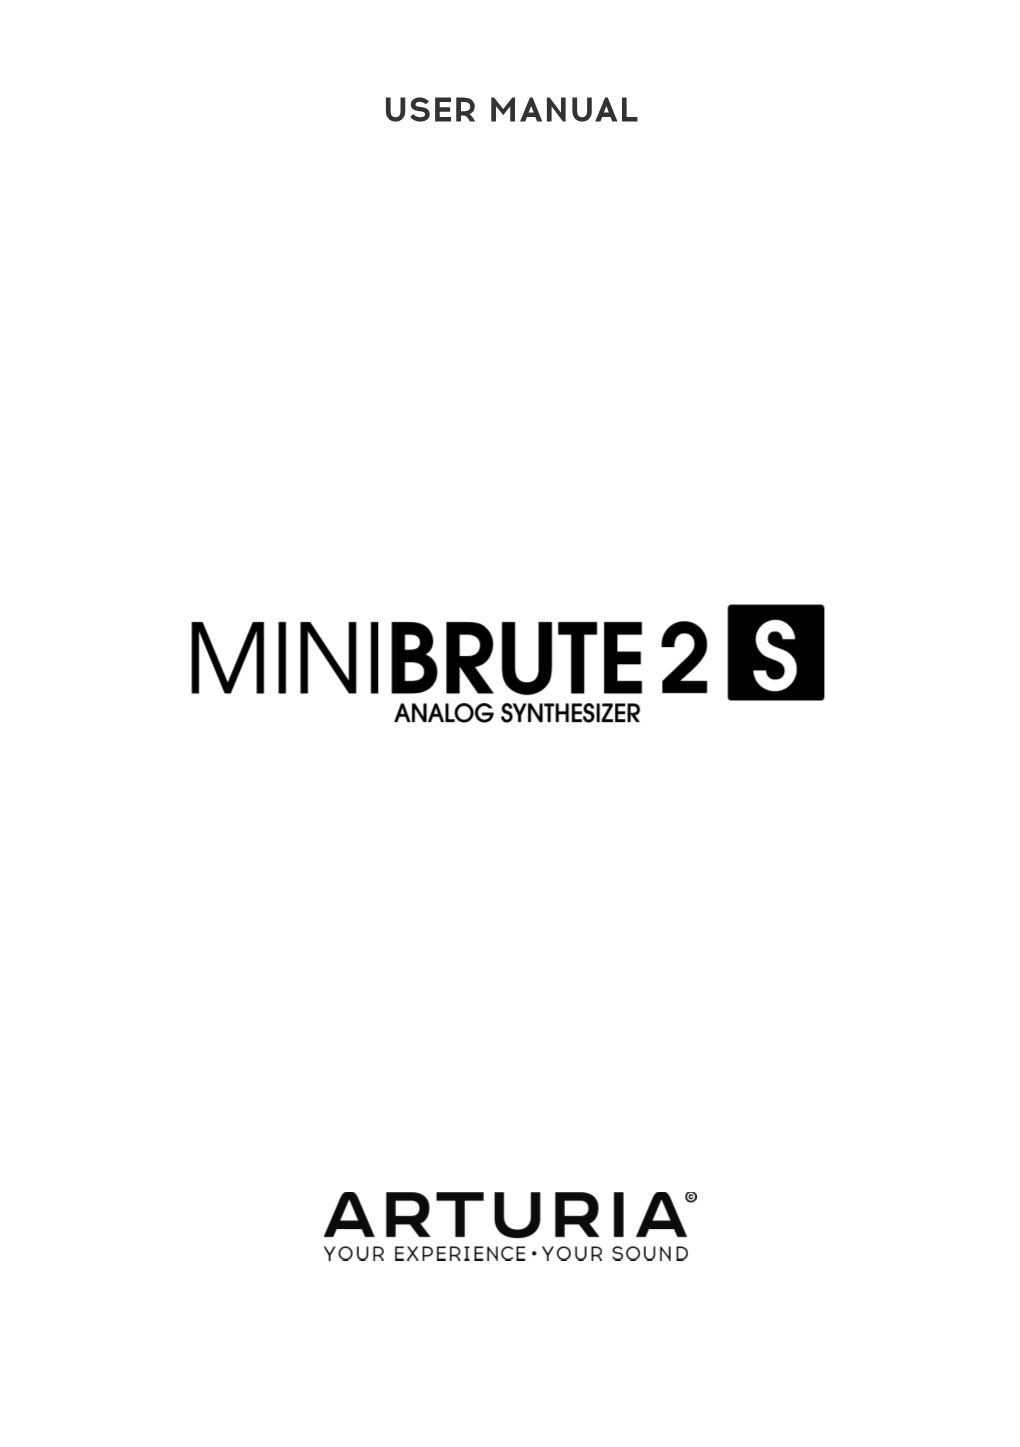 User Manual Minibrute 2S - Introduction 3 the Arturia Minibrute 2S Analog Synthesizer